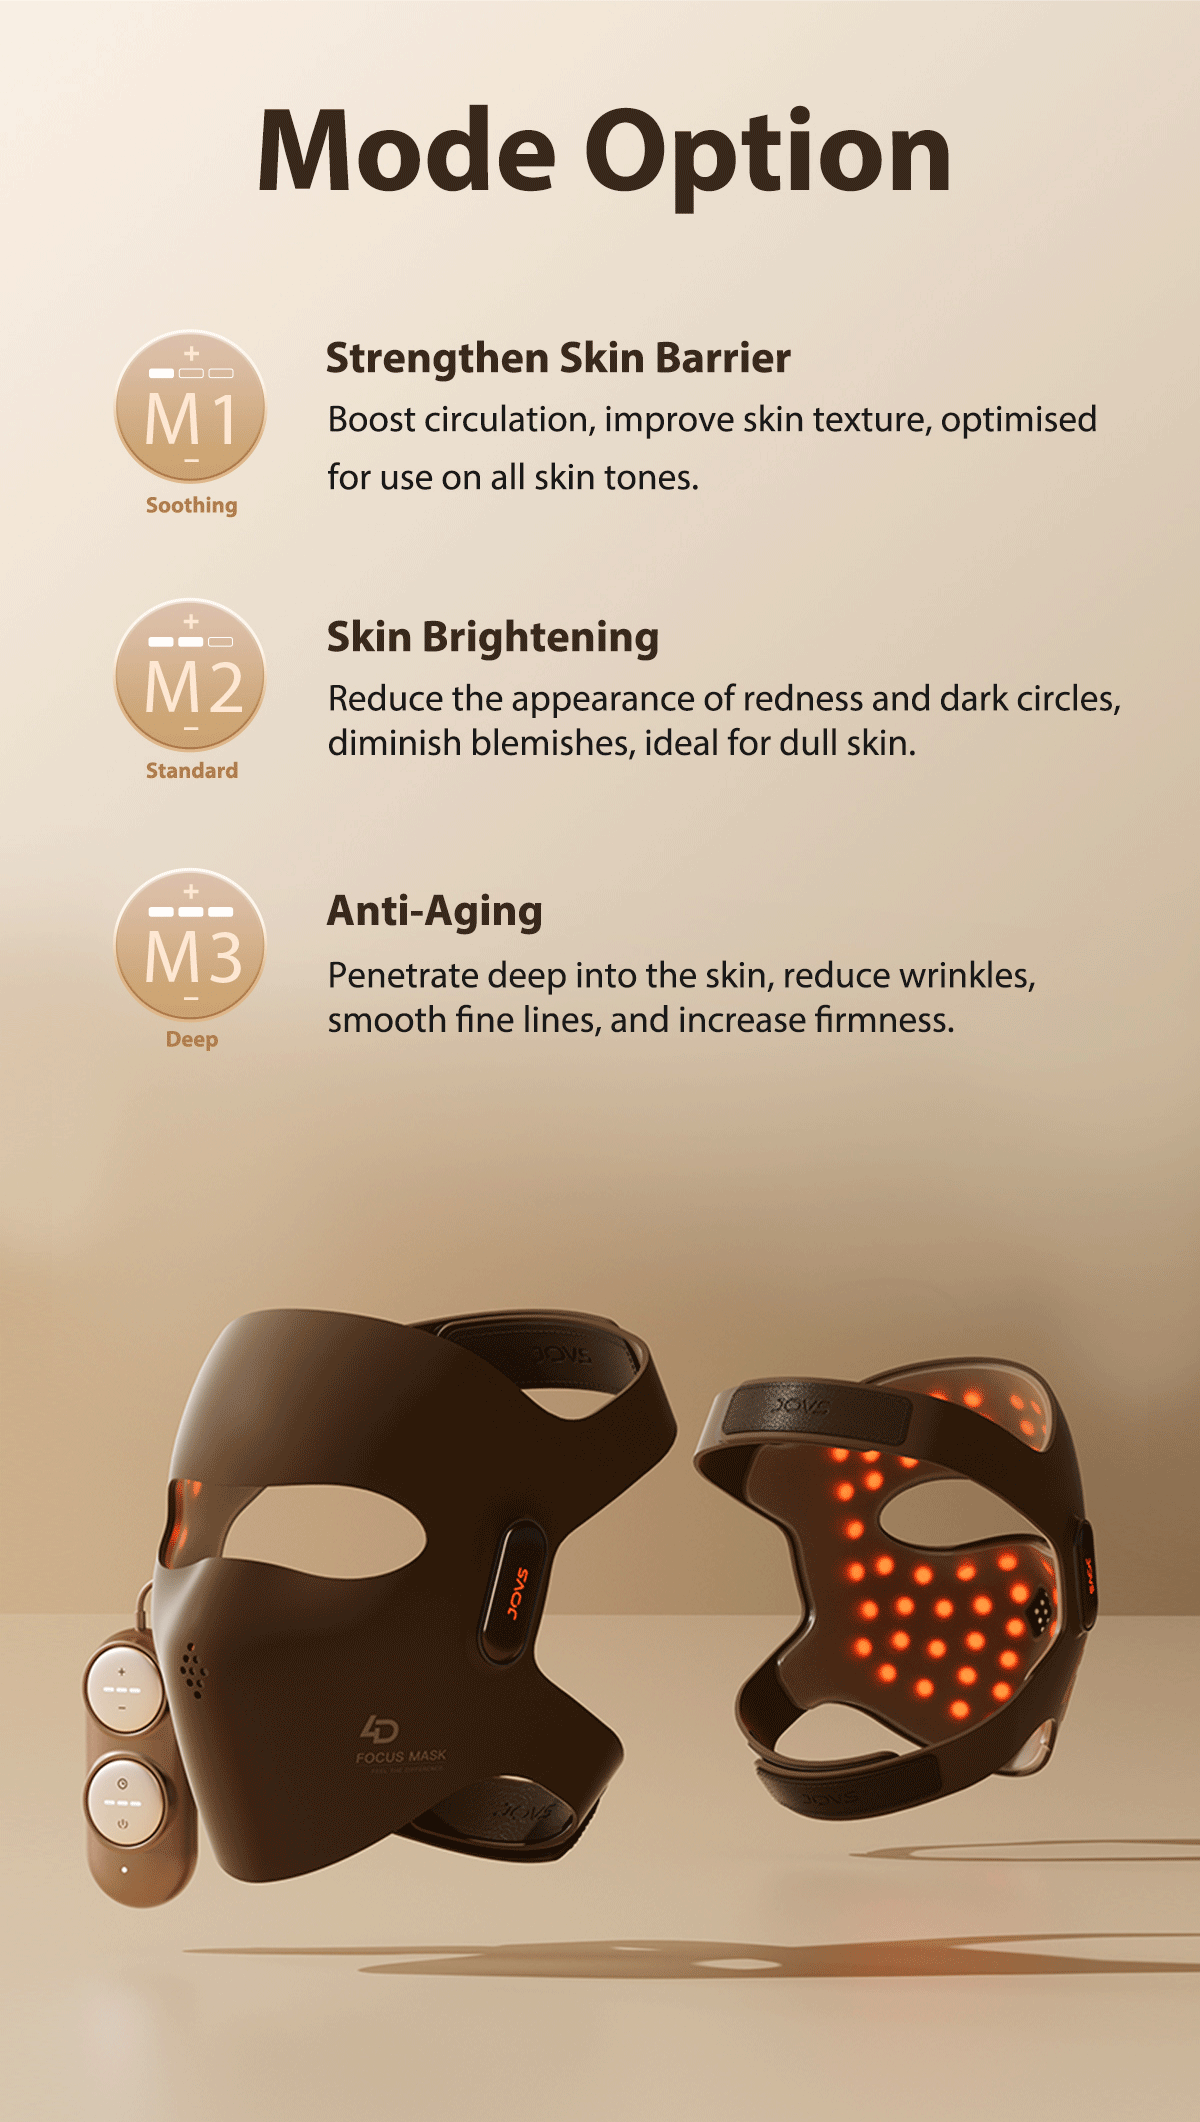 JOVS 4D Laser Light Therapy Mask showing mode options for skin strengthening, brightening, and anti-aging, with a focus on comfort and precision.